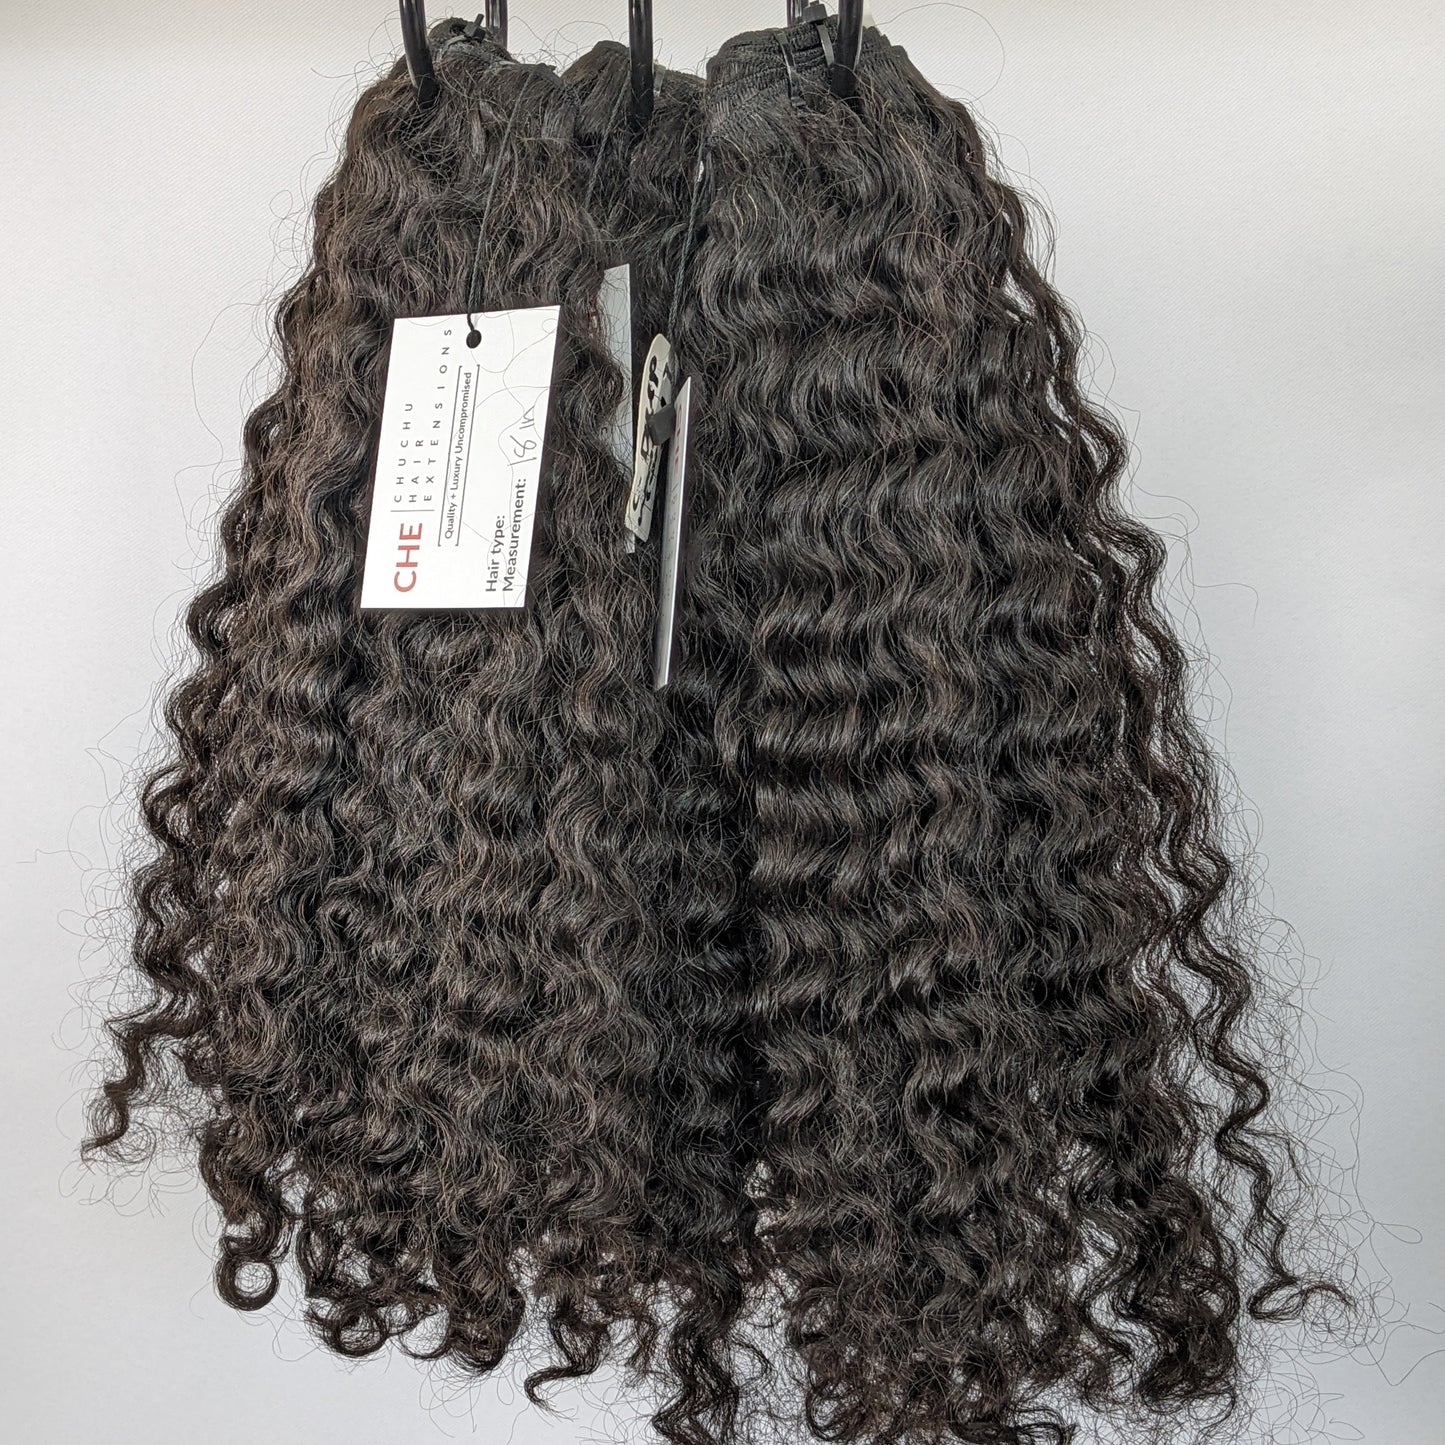 Cambodian Deep Waves Hair Extensions